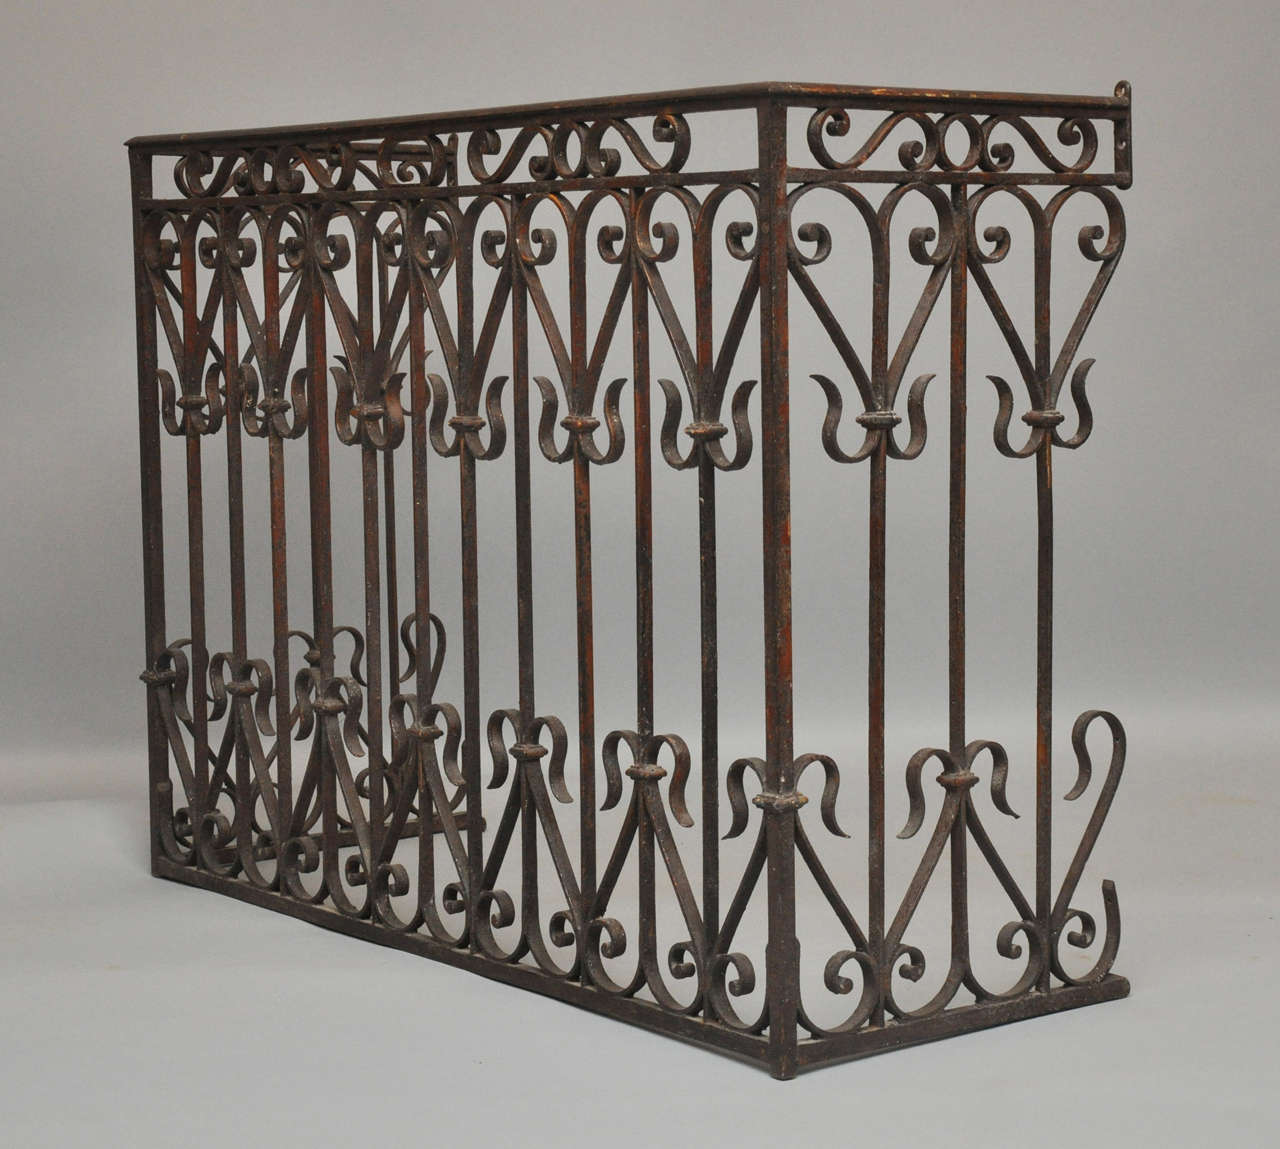 Large heavy French iron rectangular iron radiator cover with simple linear design with C-scroll detail. This piece would make a great vanity for the 